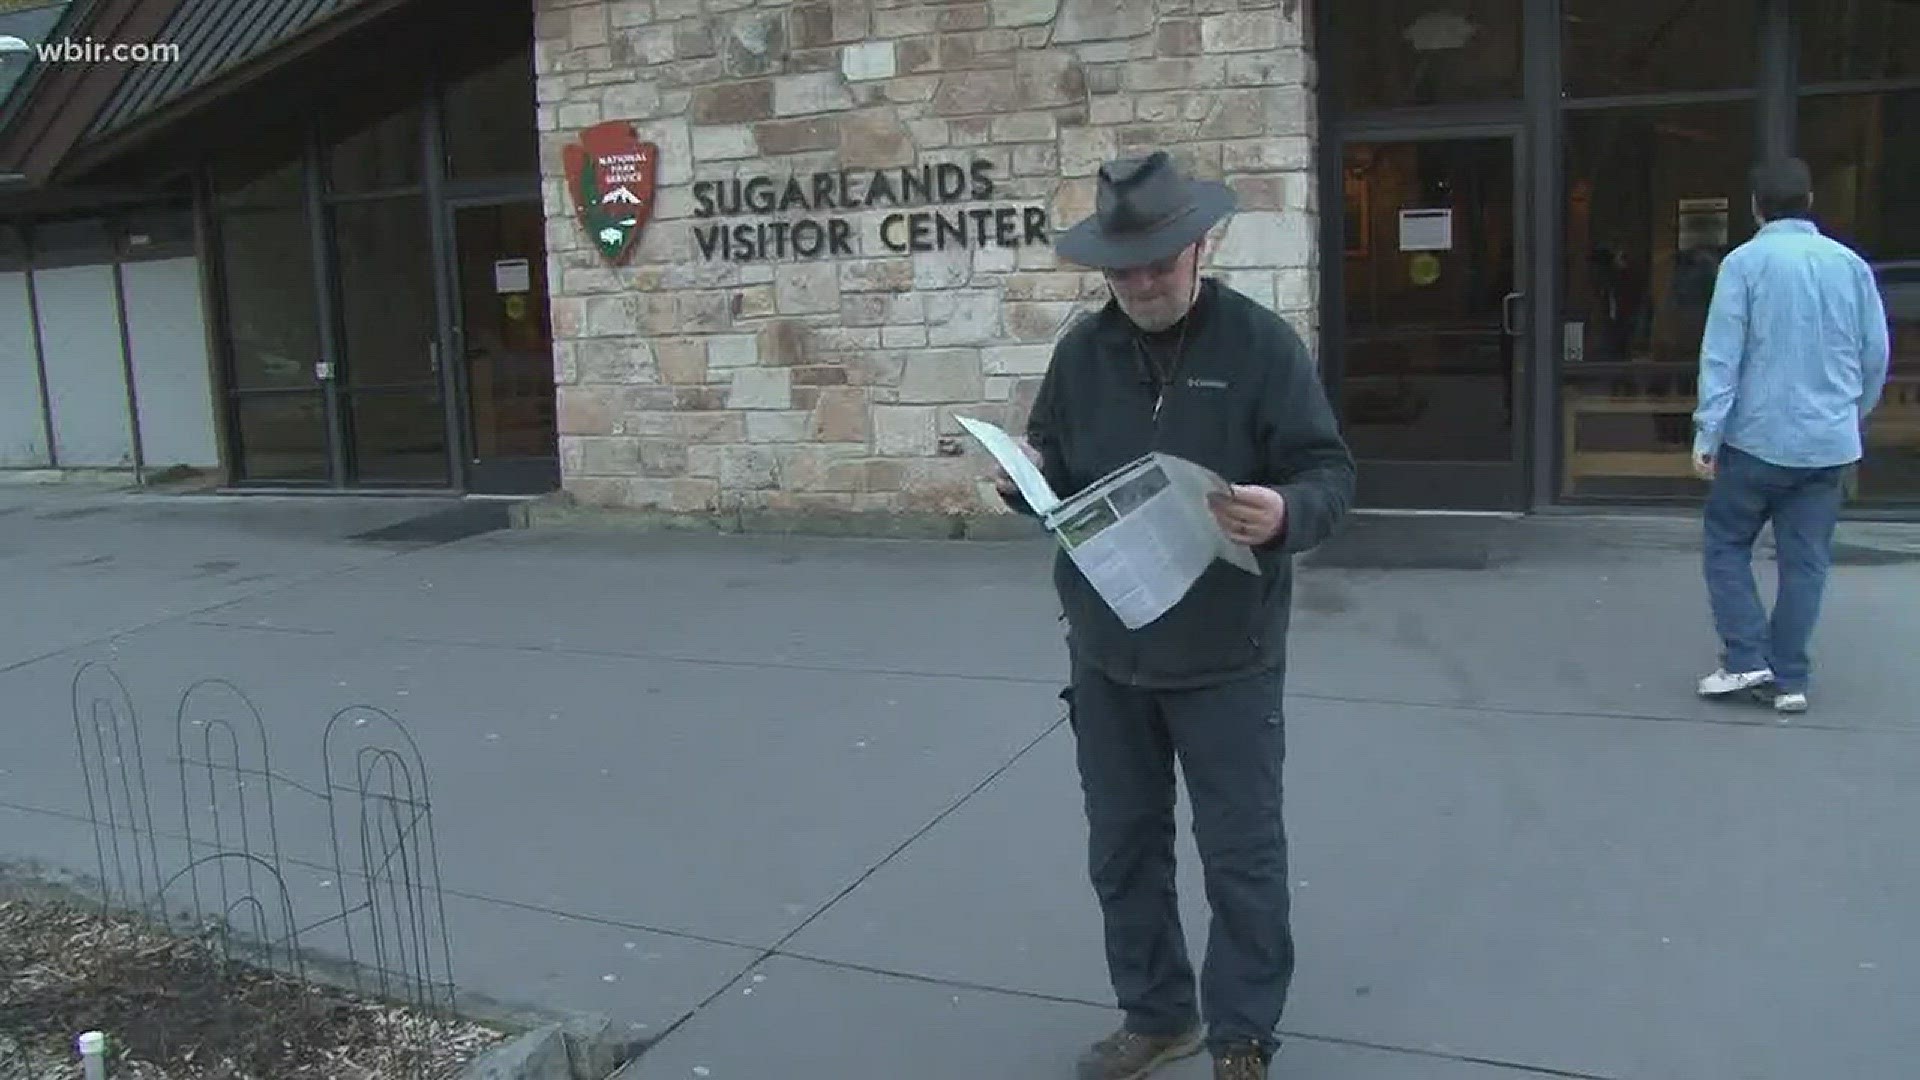 One man is doing what he can to help tourists during the government shutdown that put a stop to many services in the Great Smoky Mountain National Park.